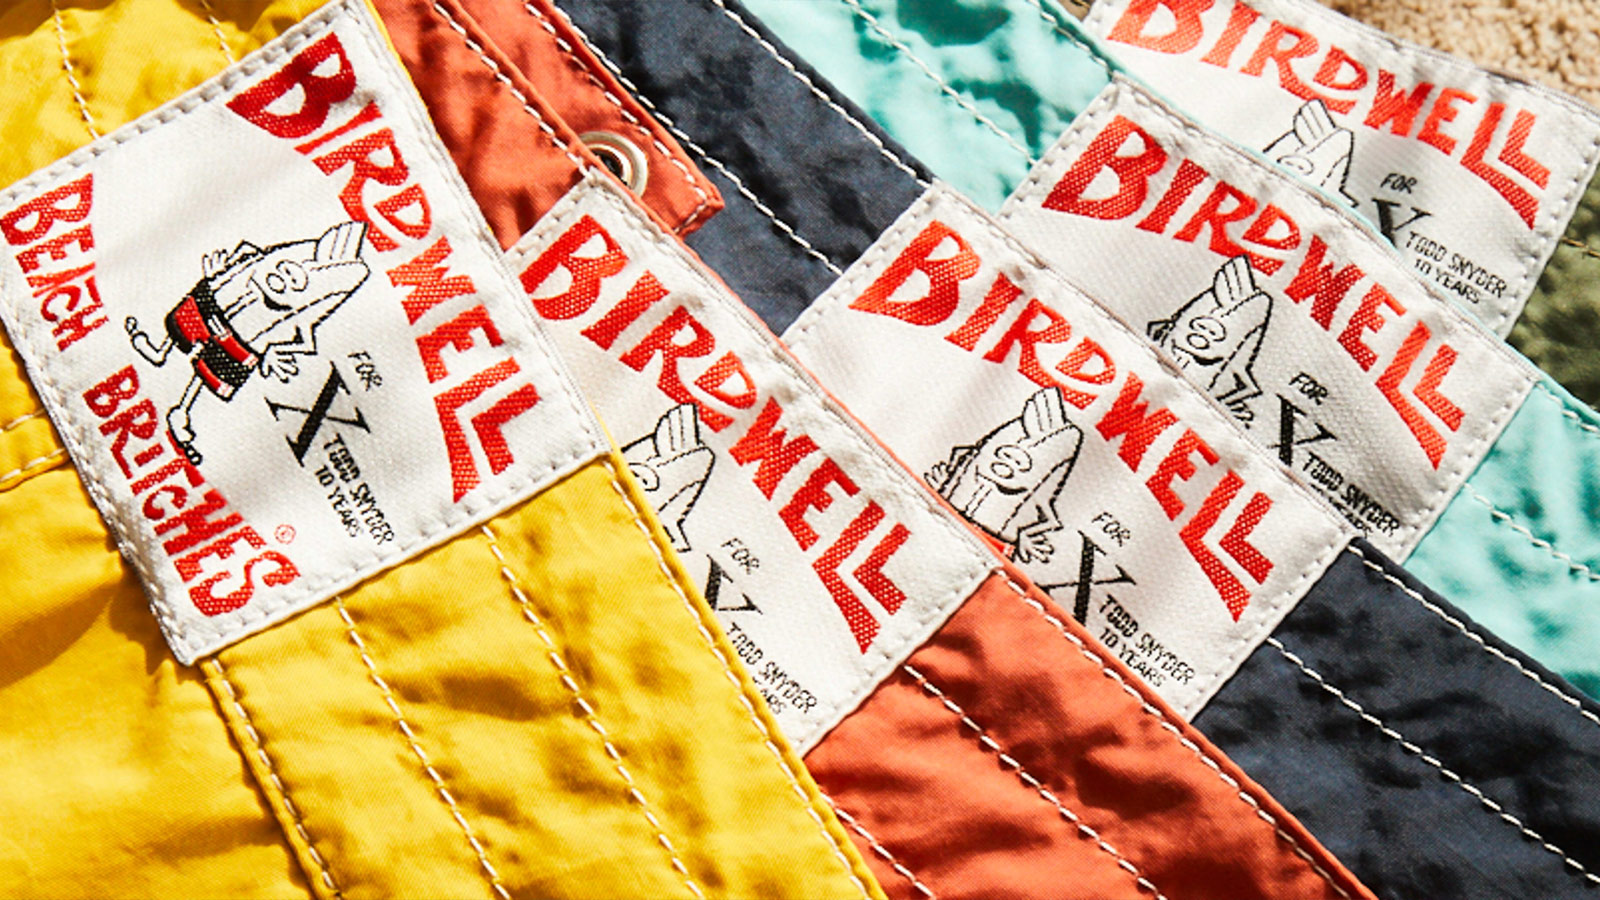 Todd Snyder x Birdwell Stone-Washed Swim Capsule Collection